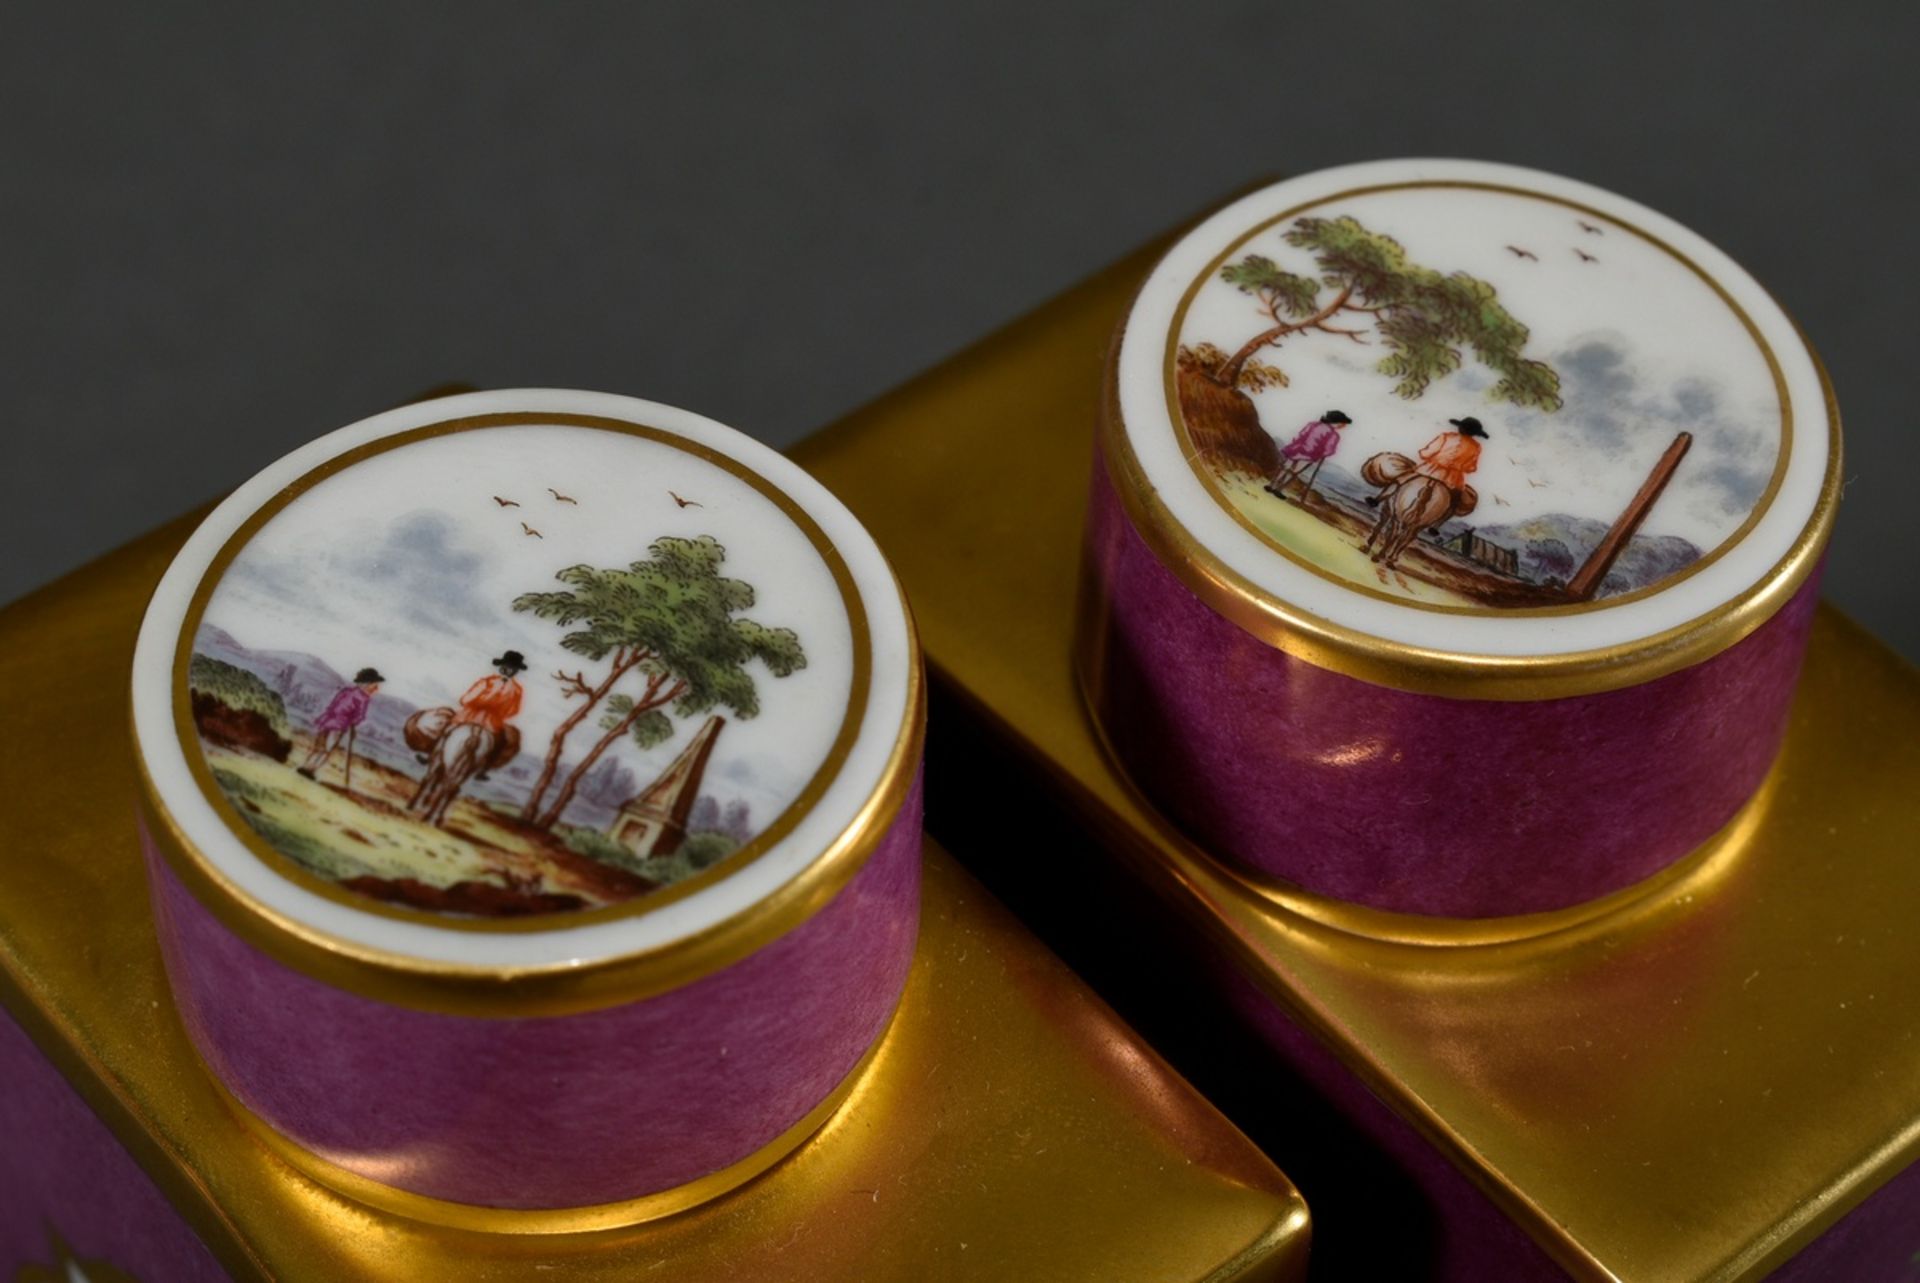 Pair of Meissen tea caddies after an old model with polychrome painting "landscapes with figures st - Image 3 of 5